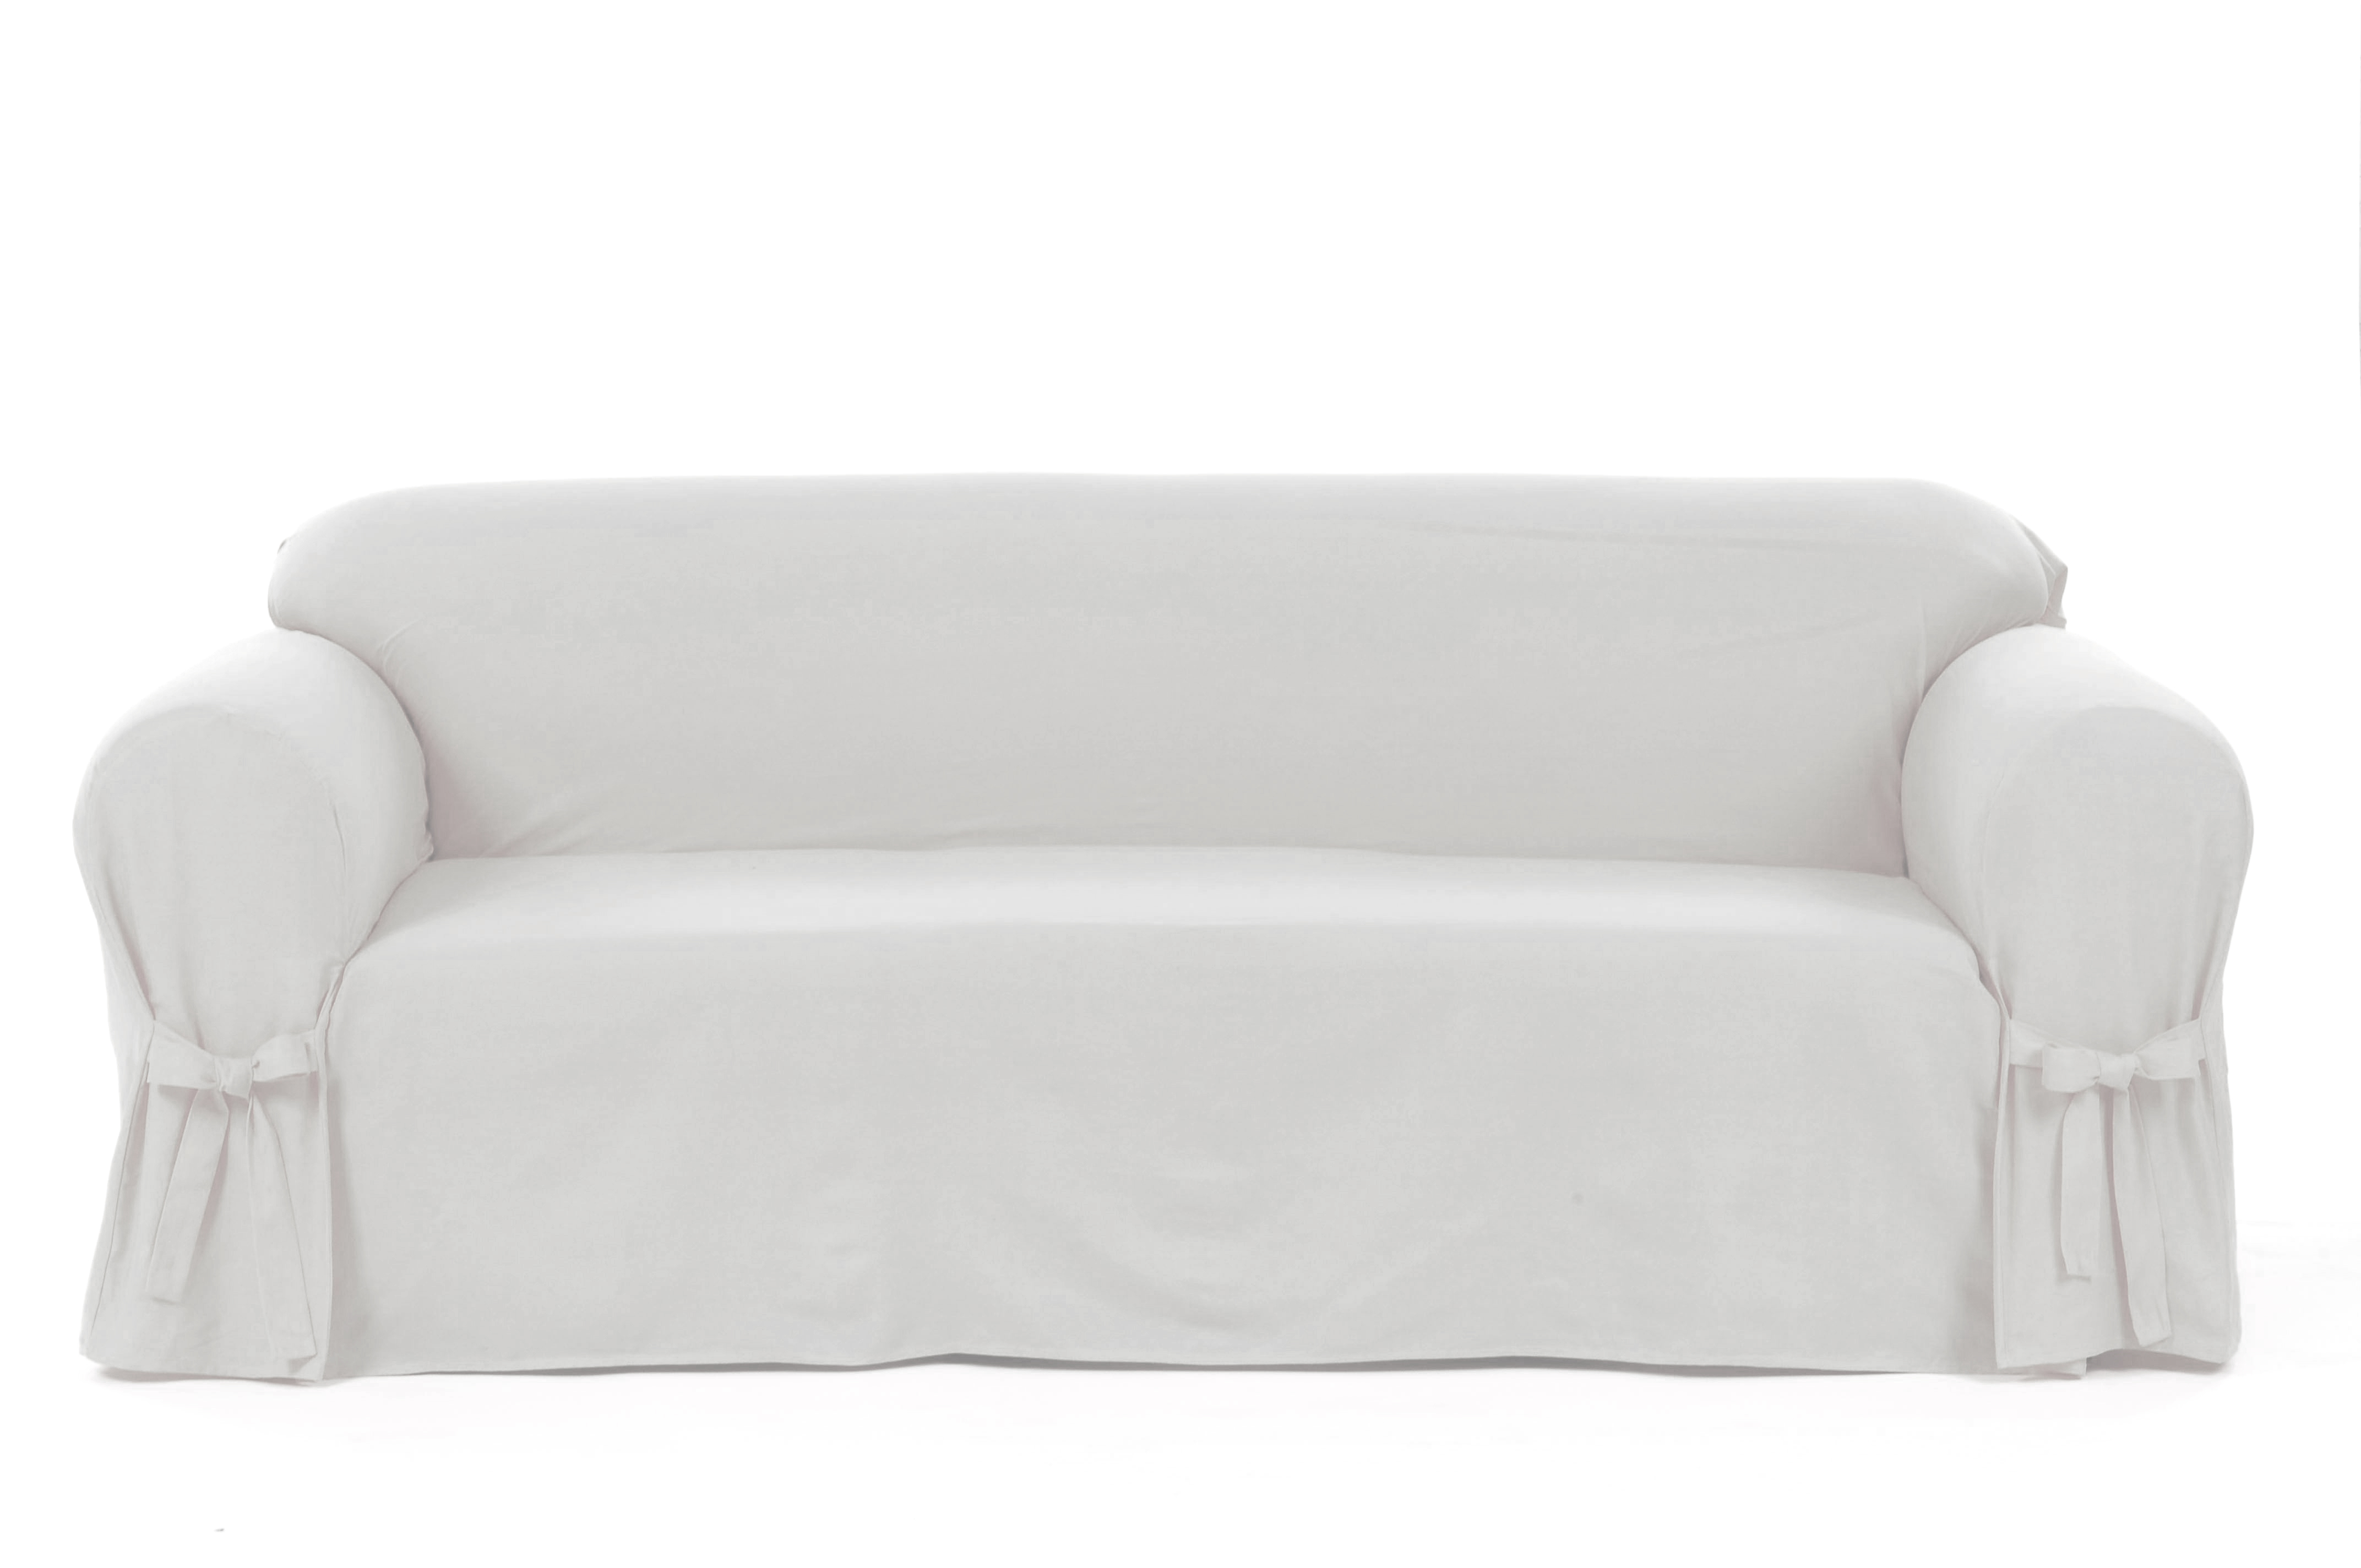 Classic Slipcovers Cotton Duck one piece sofa slipcover